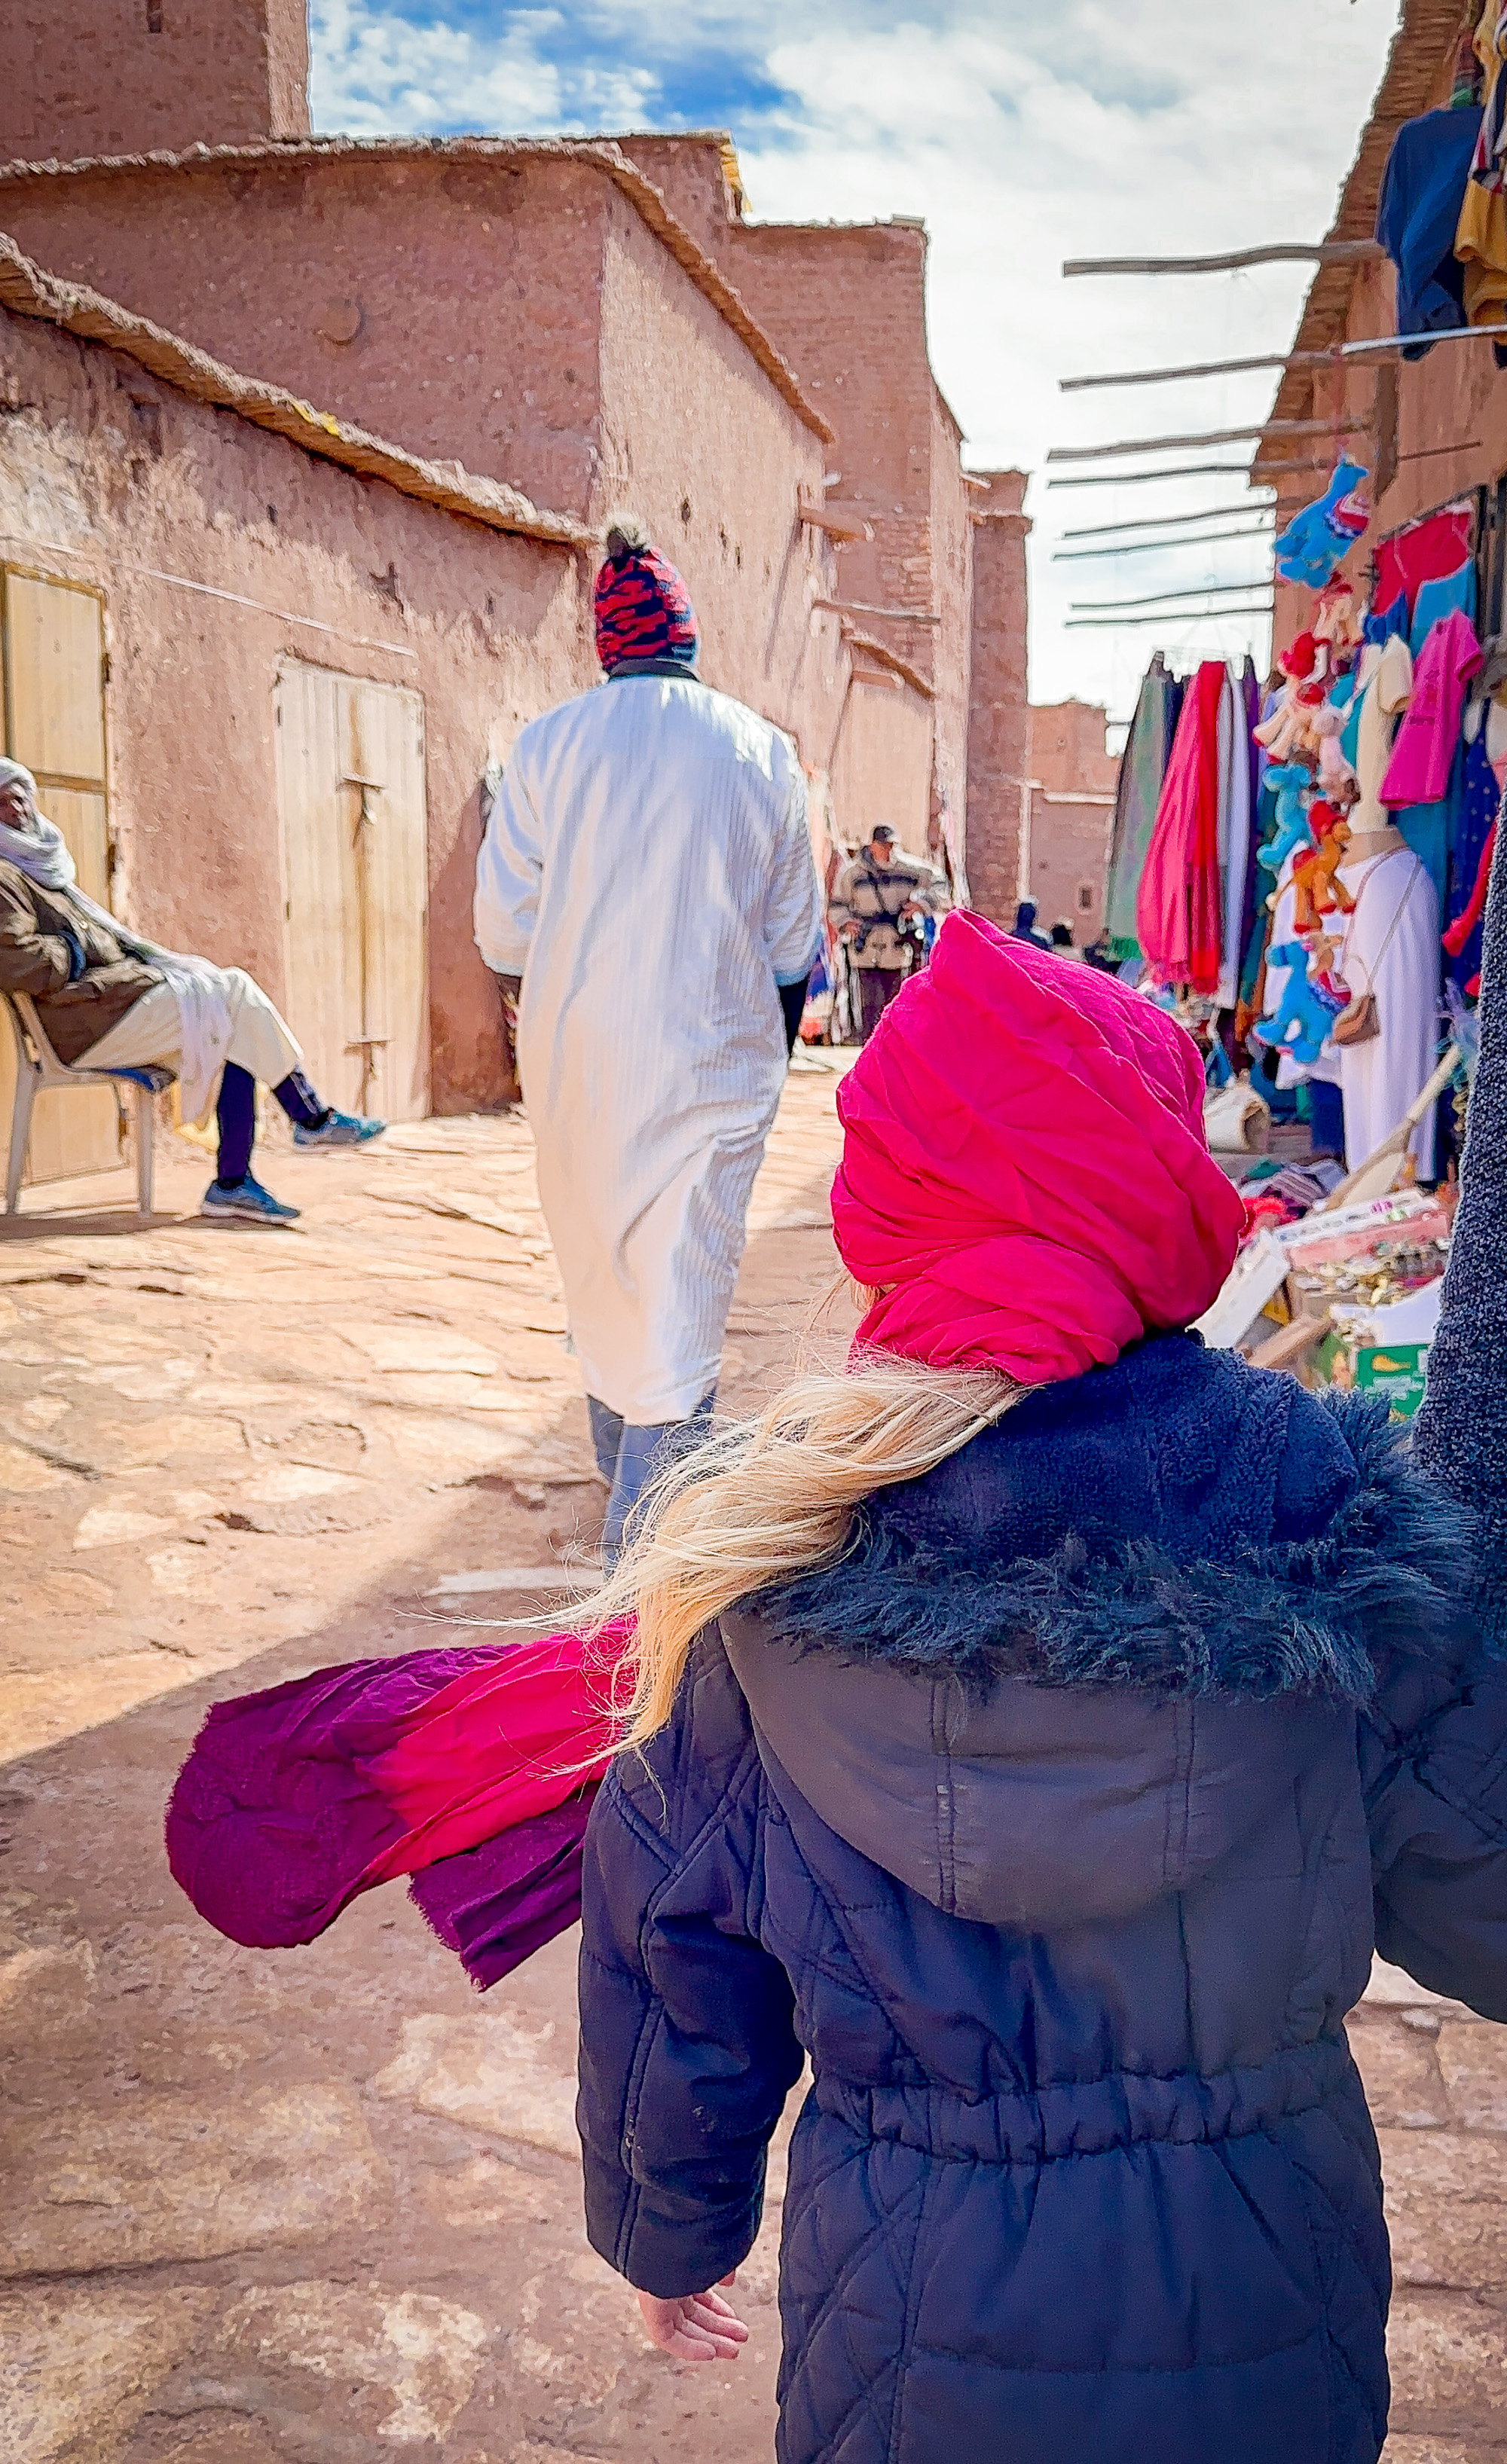 A child follows a Berber guide through the alleyways of UNESCO World Heritage Site Ait Benhaddou